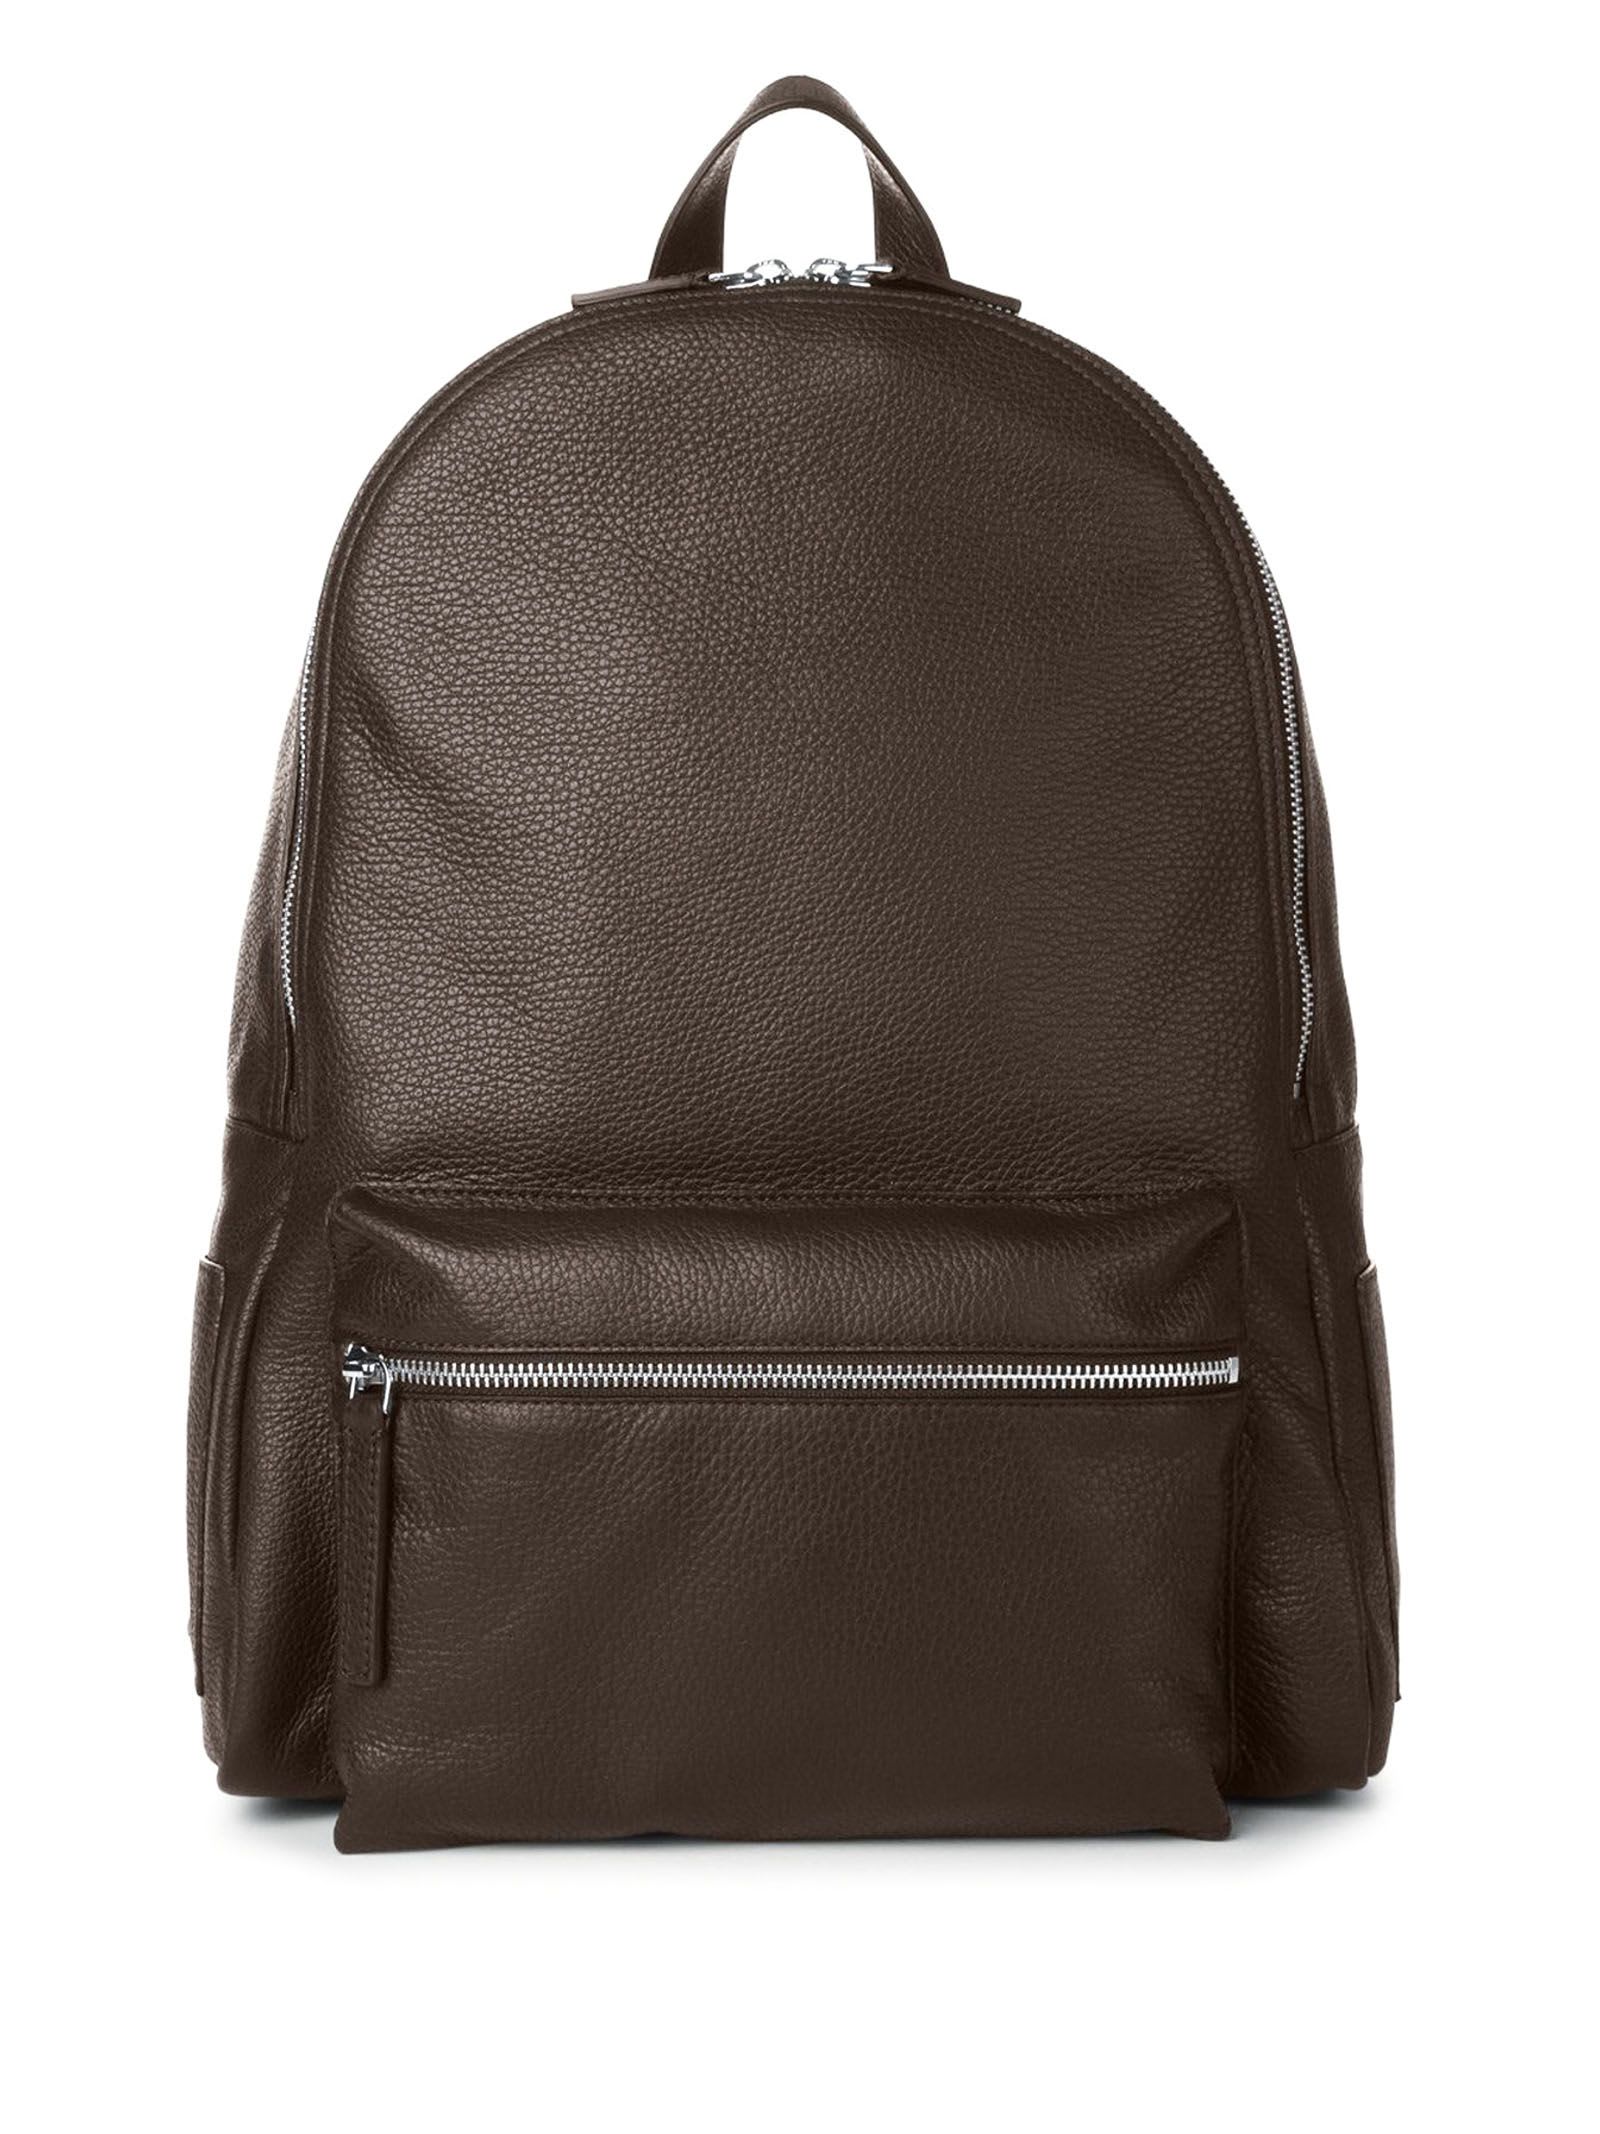 Brown Calf Leather Micron Backpack